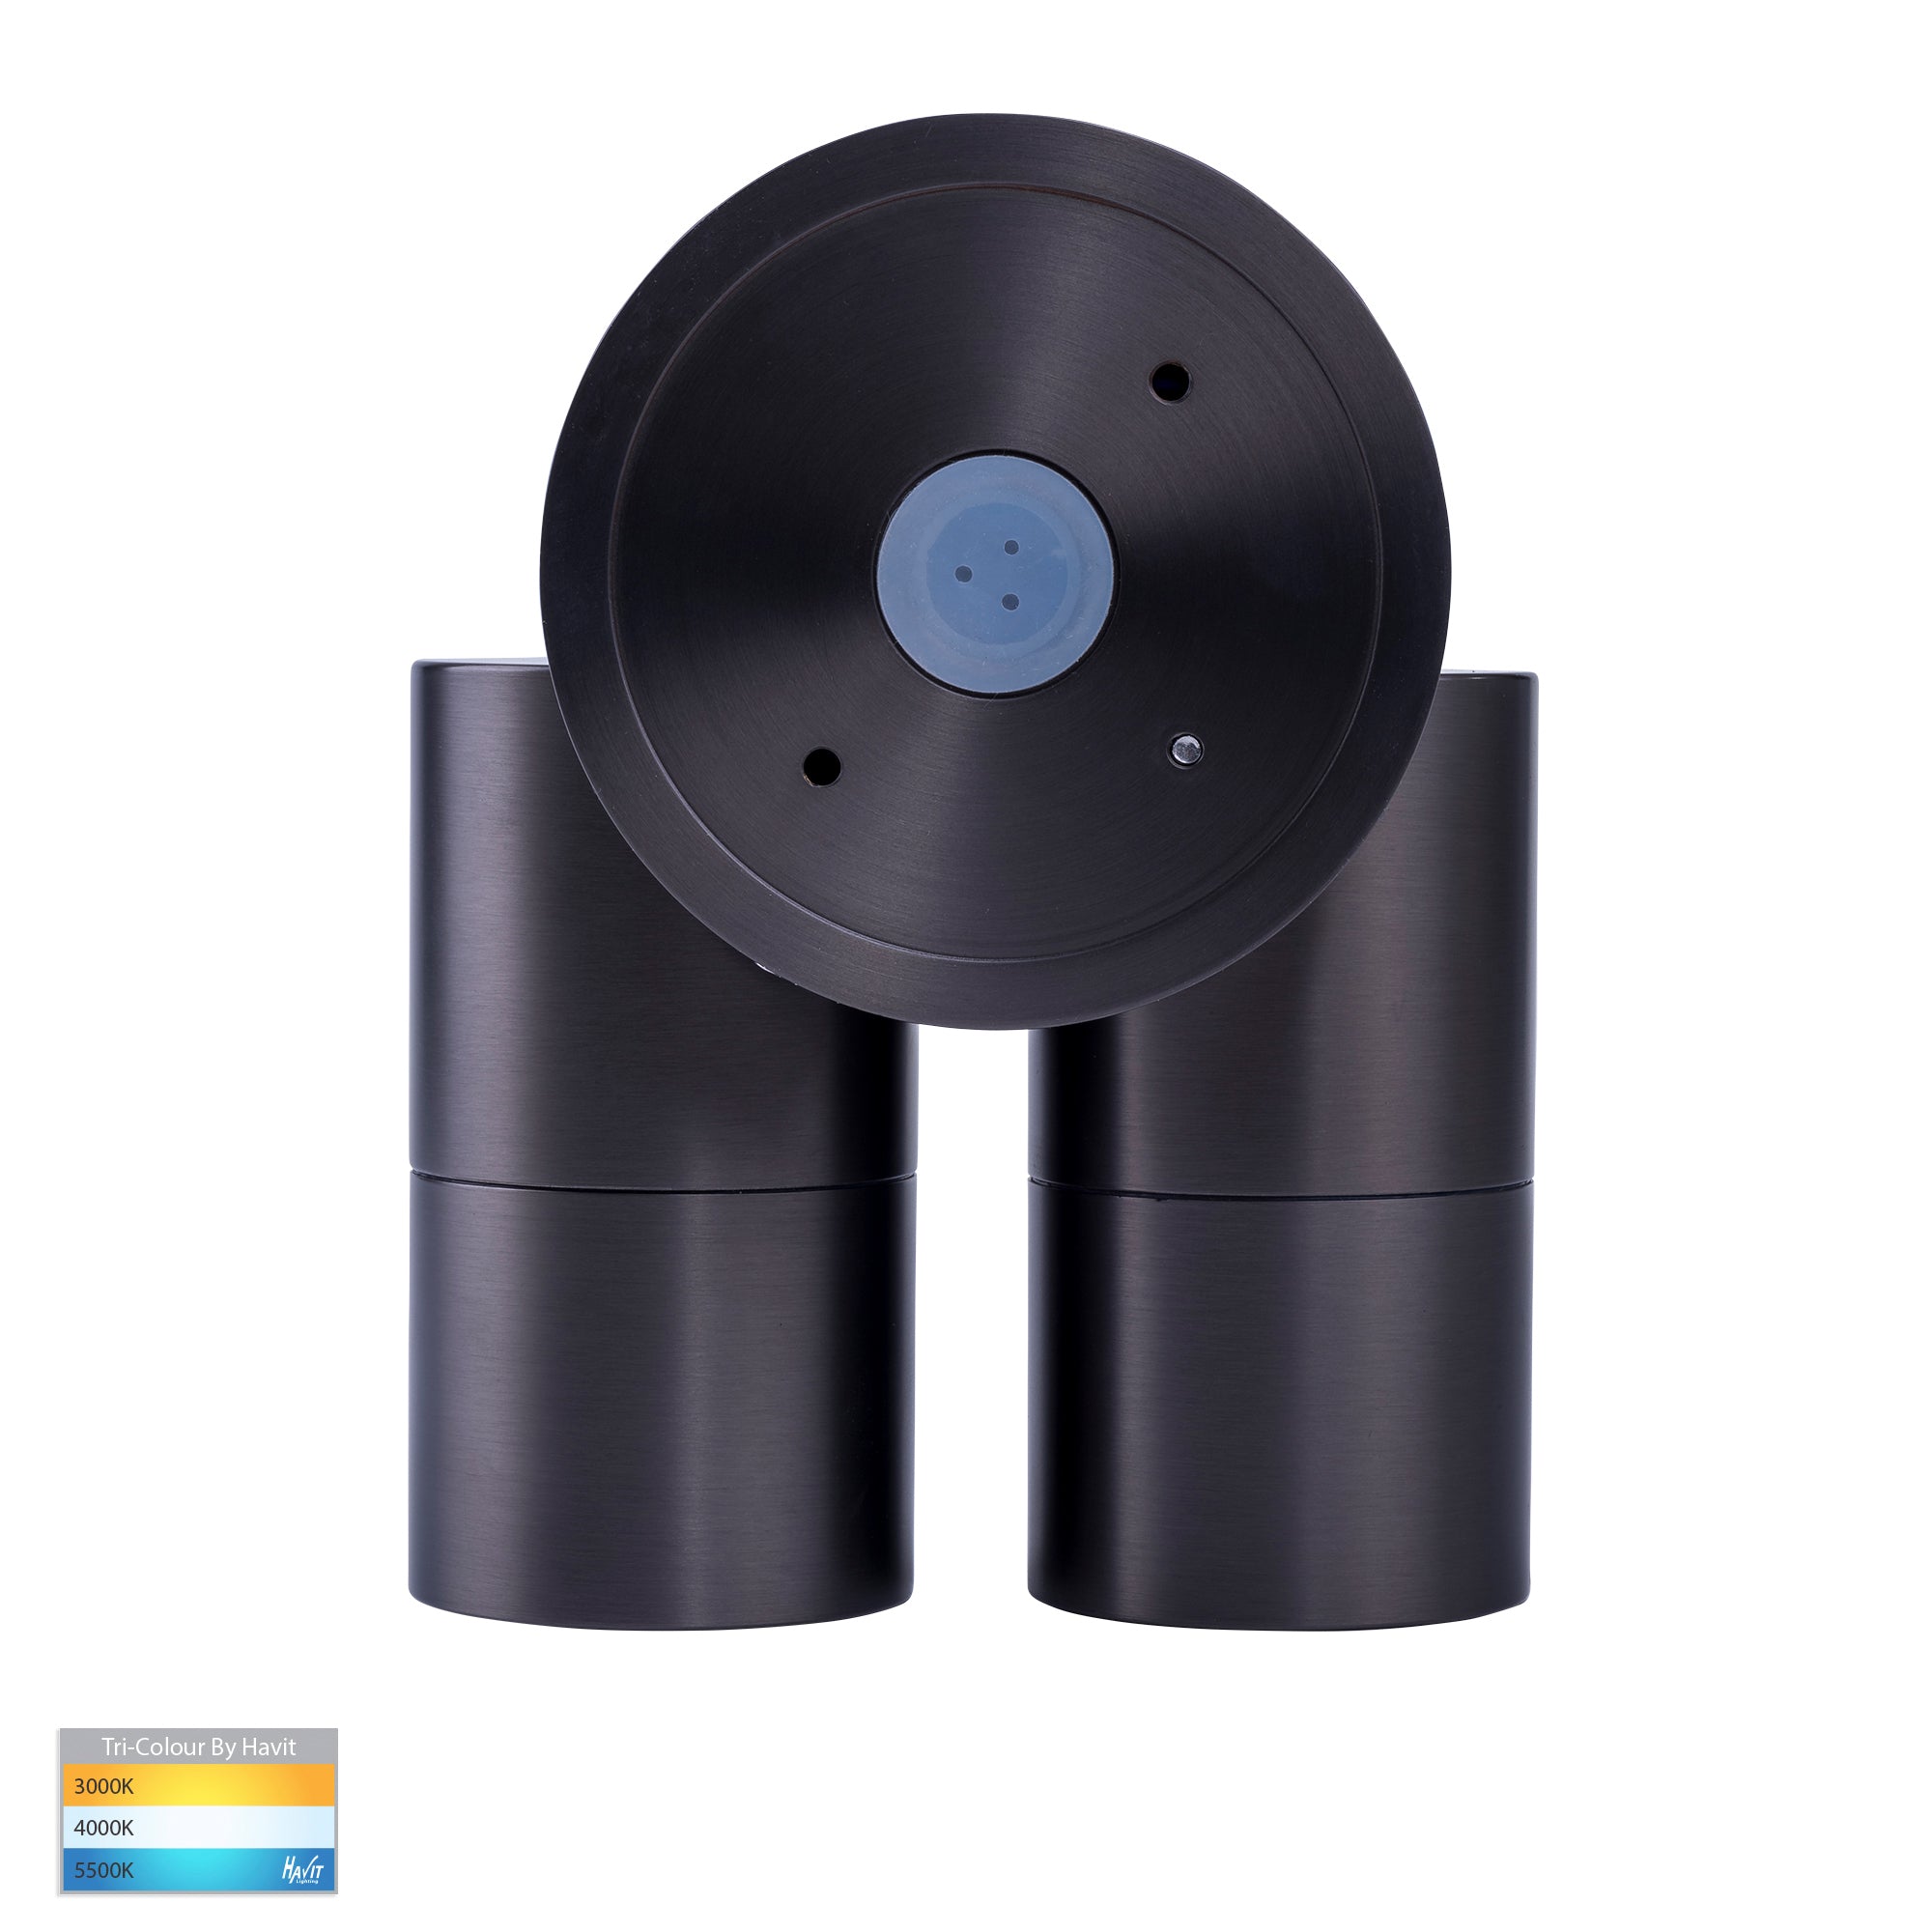 HV1375T-HV1377T - Tivah Solid Brass Graphite Coloured TRI Colour Double Adjustable Wall Pillar Lights